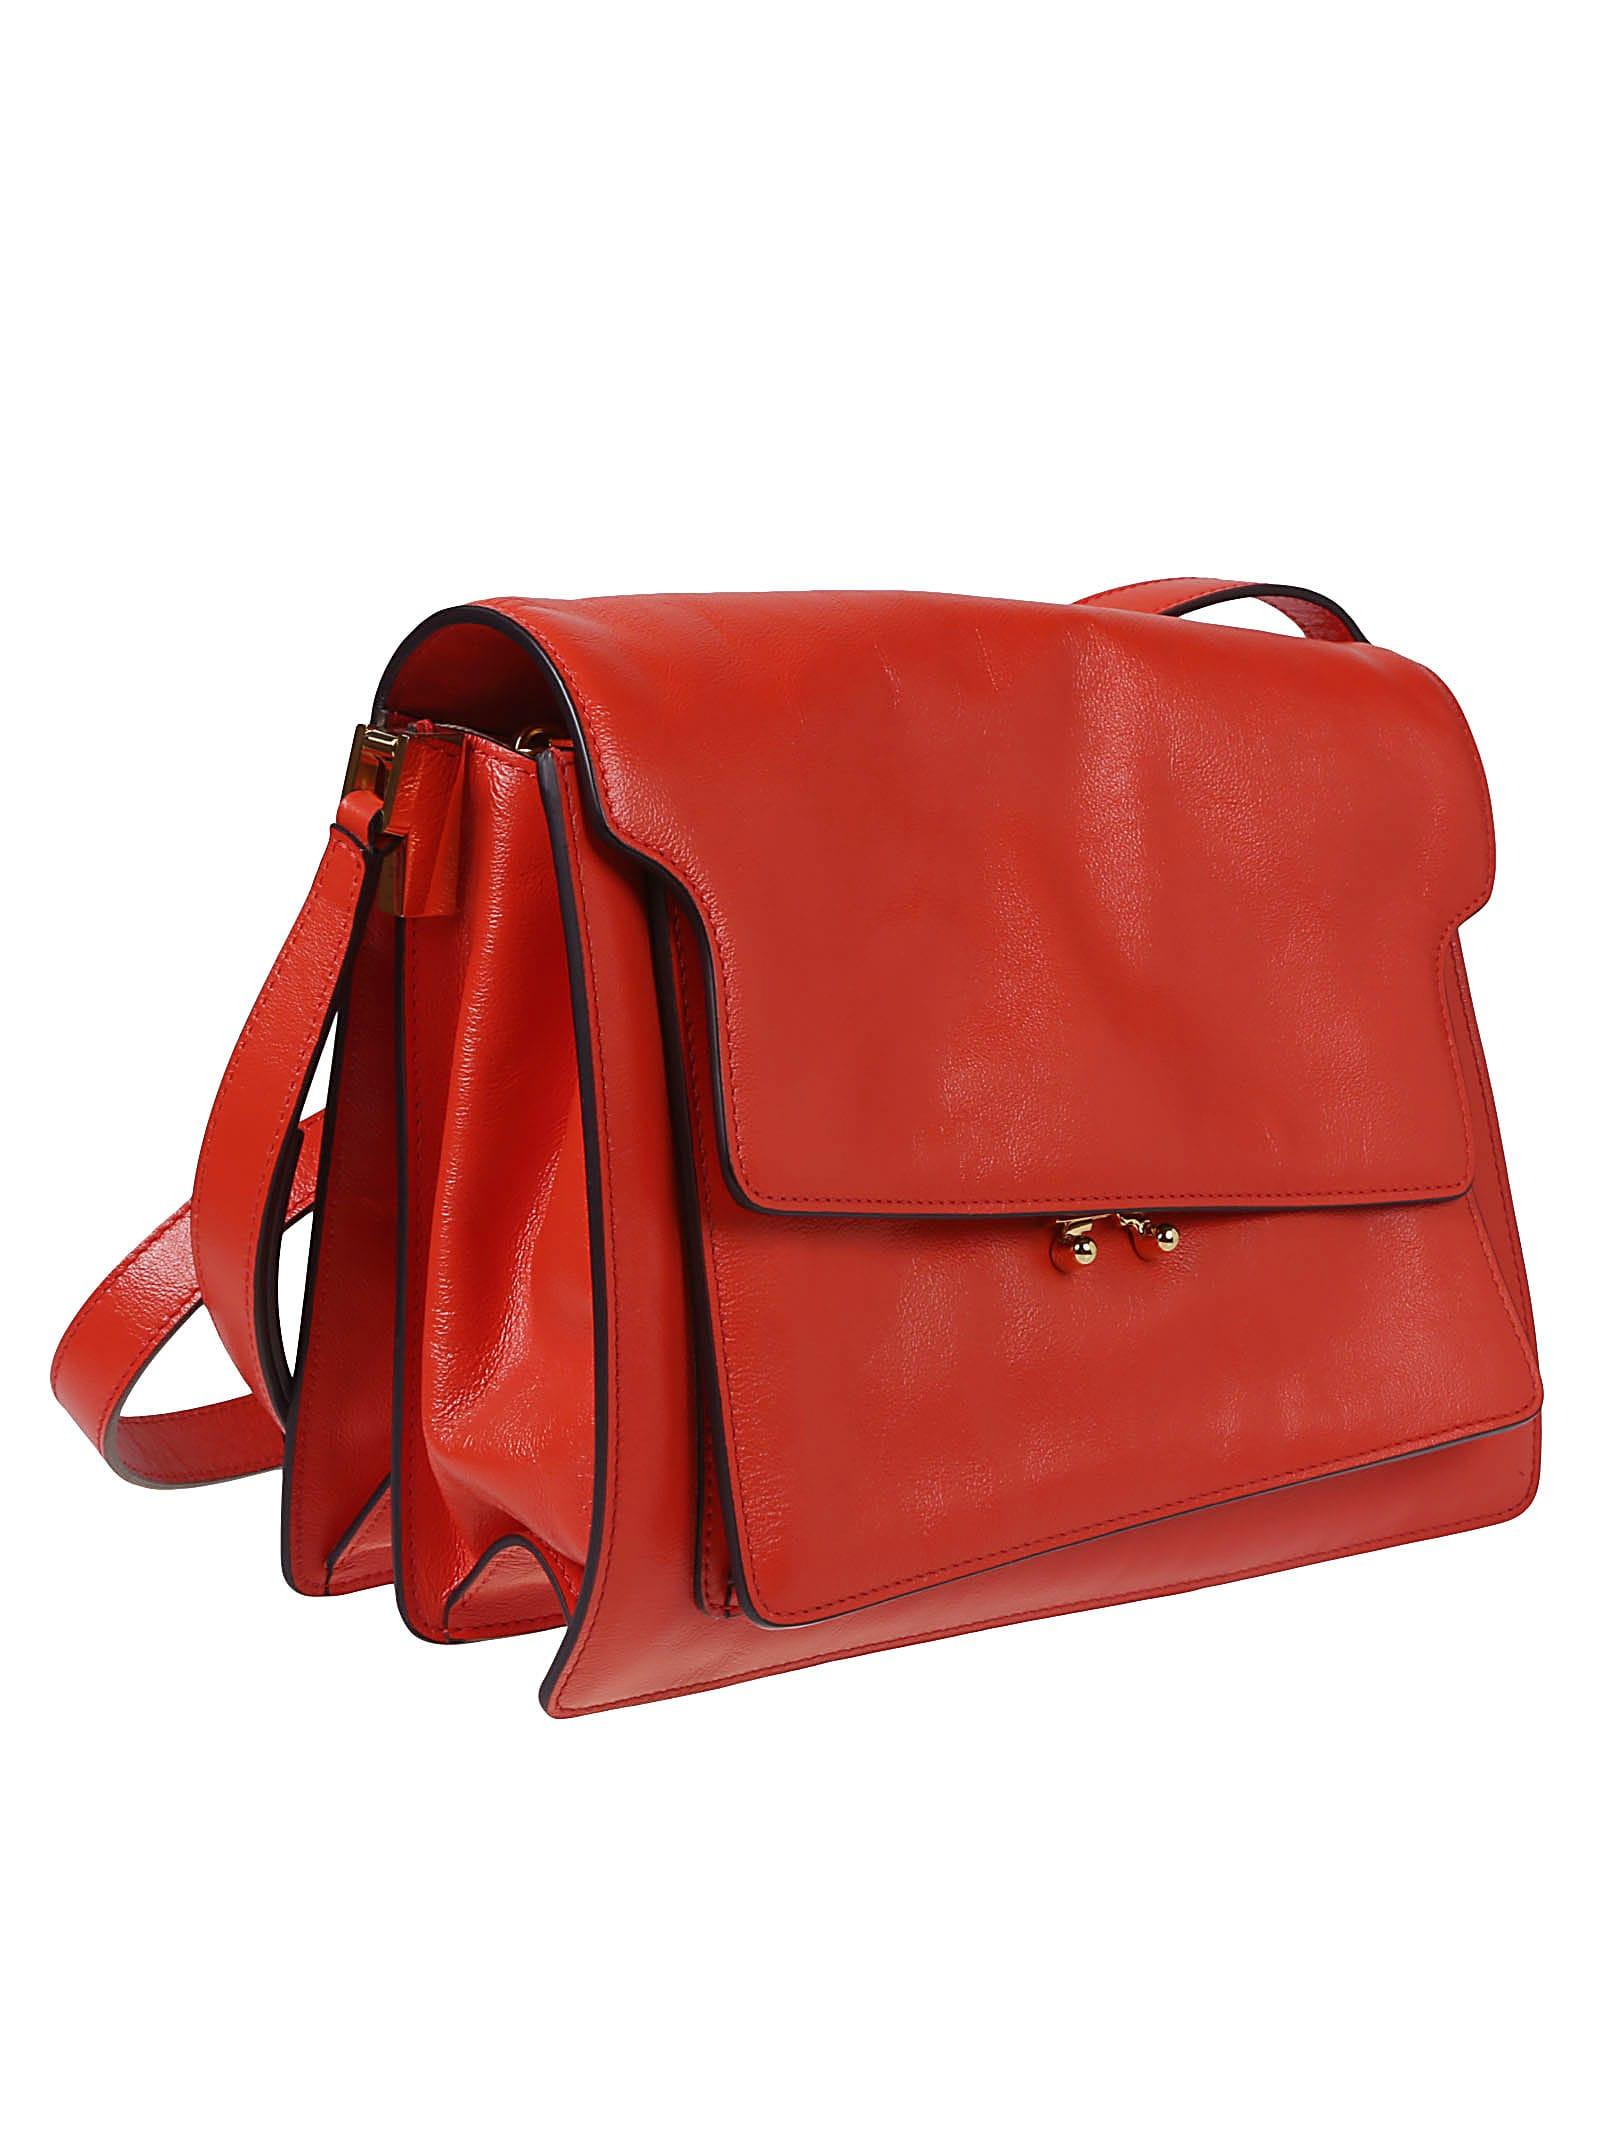 Marni Trunk Soft Large Bag in Red